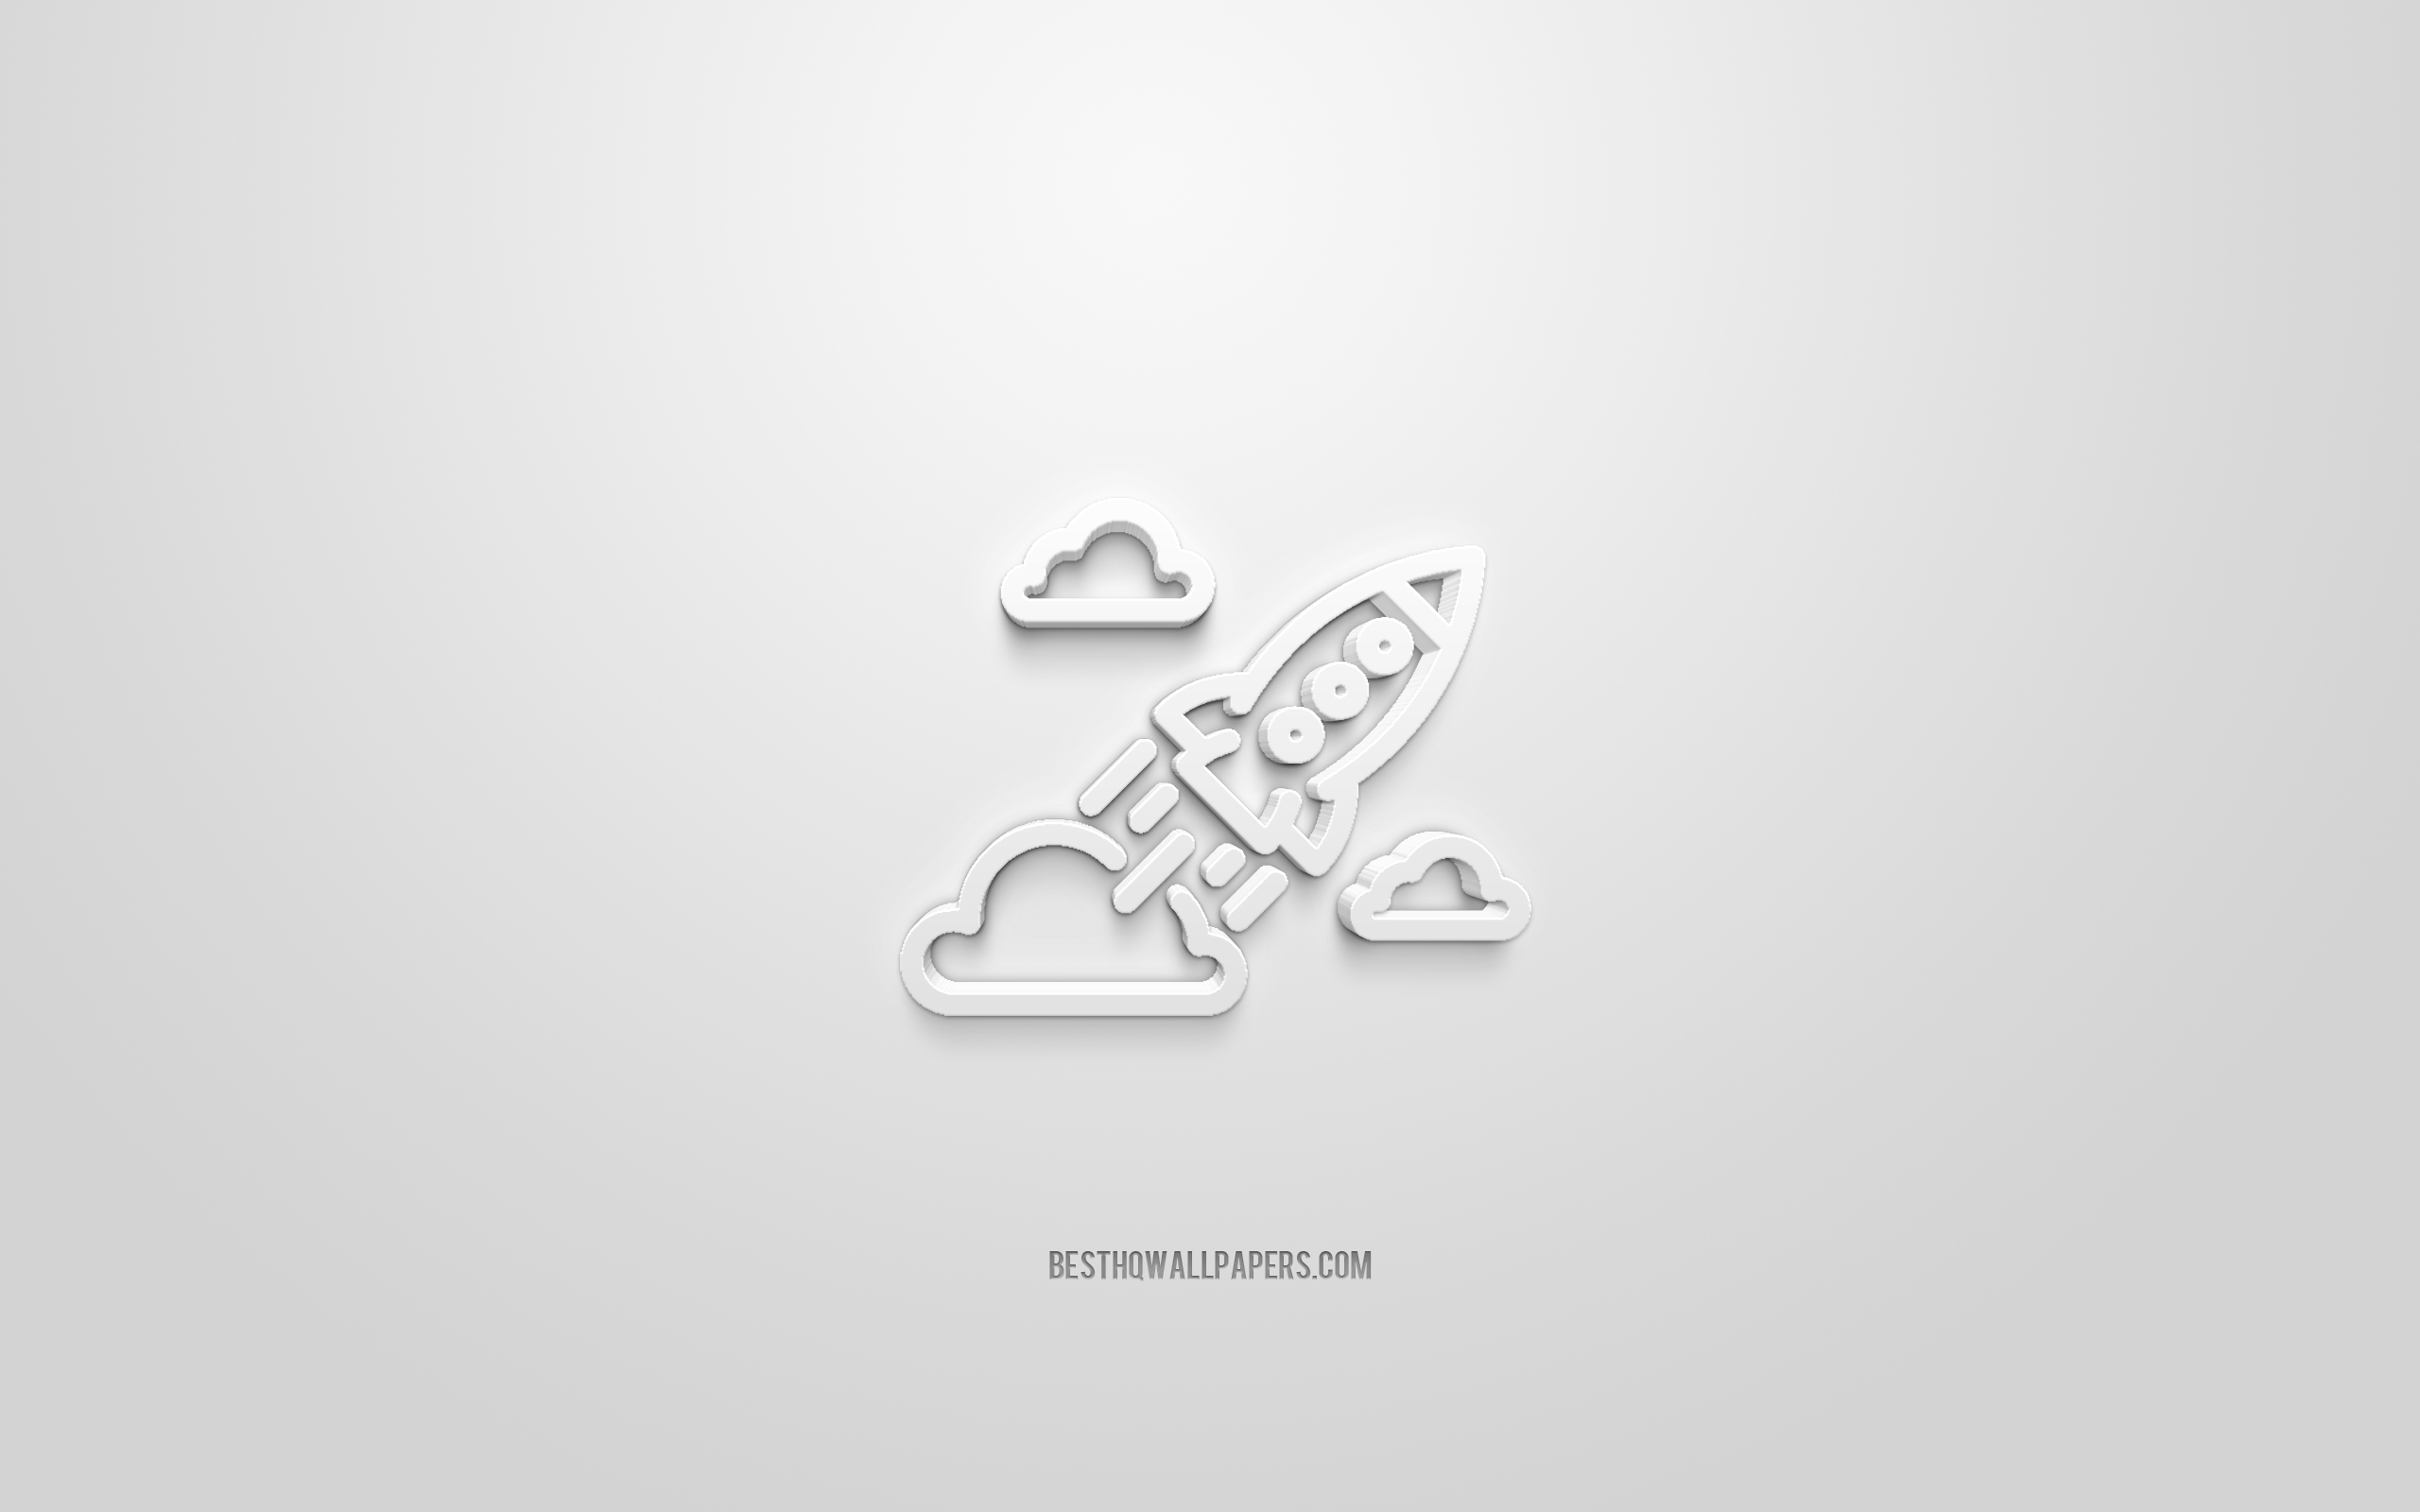 Download wallpapers startup d icon white background d symbols start up creative d art rocket d icon d icons start up sign business d icons for desktop with resolution x high quality